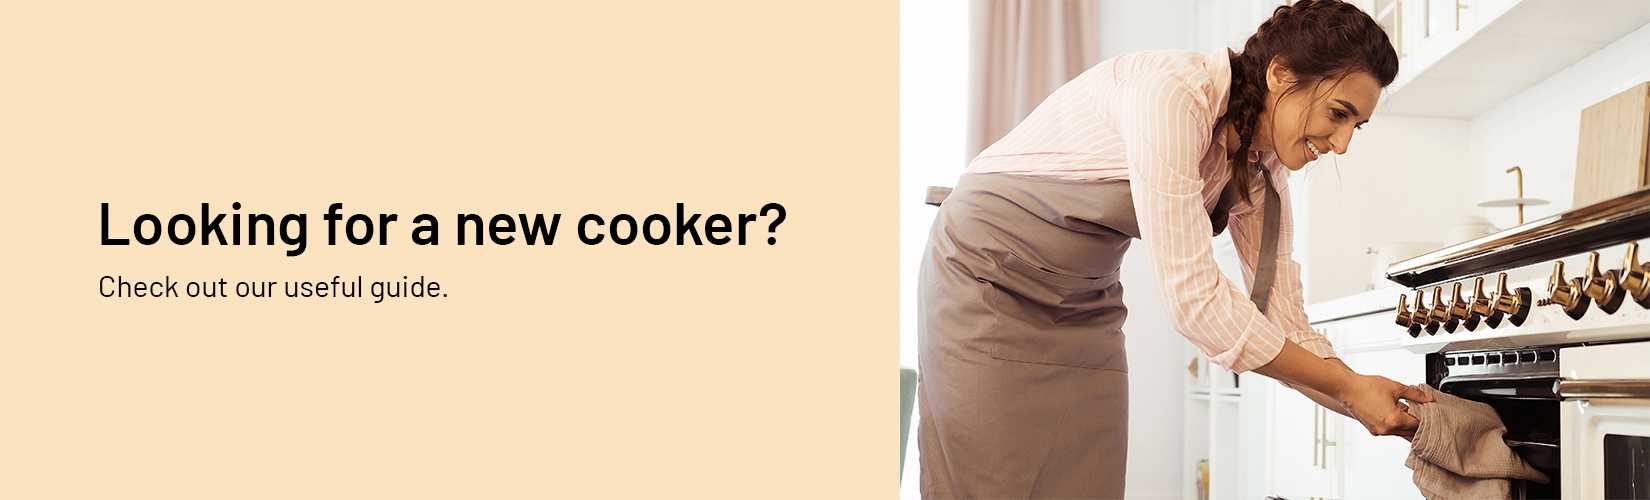 Looking for a new cooker? Check out our useful guide.